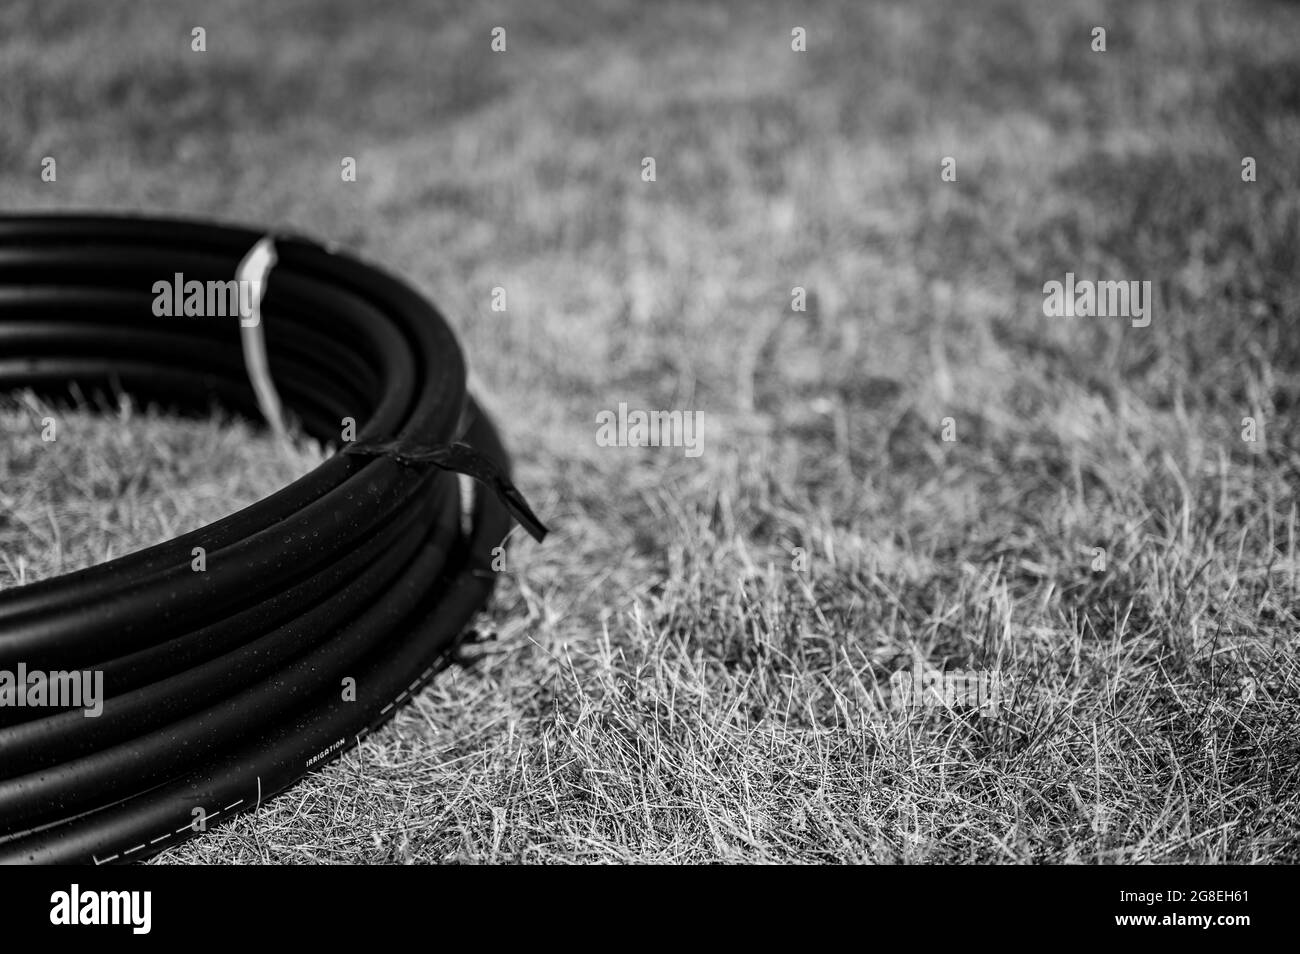 Coil of 1 inch irrigation tubing ready for new installation on top of brown and damaged dry grass. Stock Photo